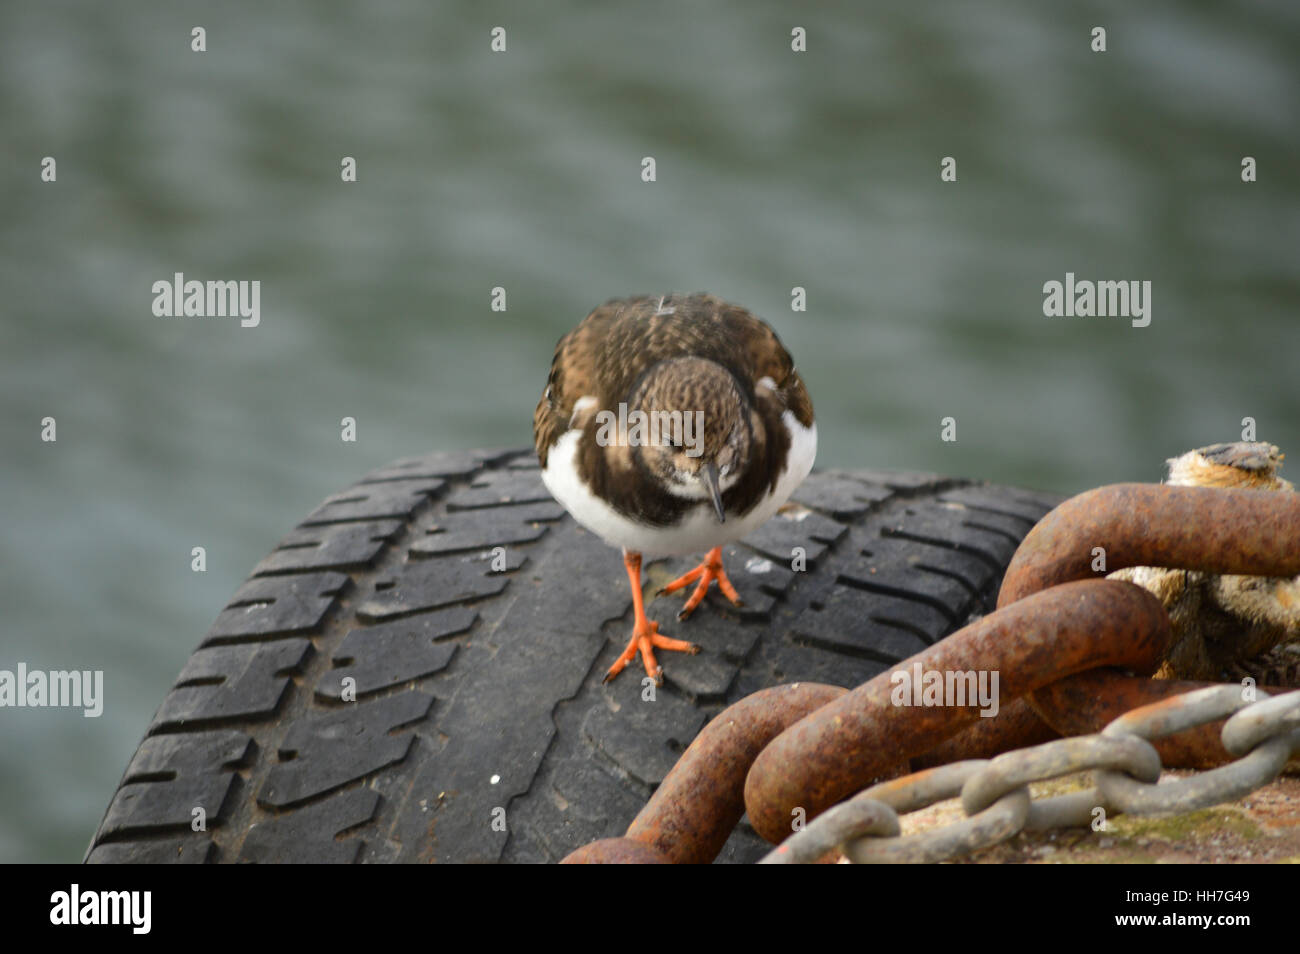 Turnstone bird on tire at harbor, space for text at top, landscape image, wildlife on the harbourside, Paignton, Torbay, Devon, England United Kingdom Stock Photo